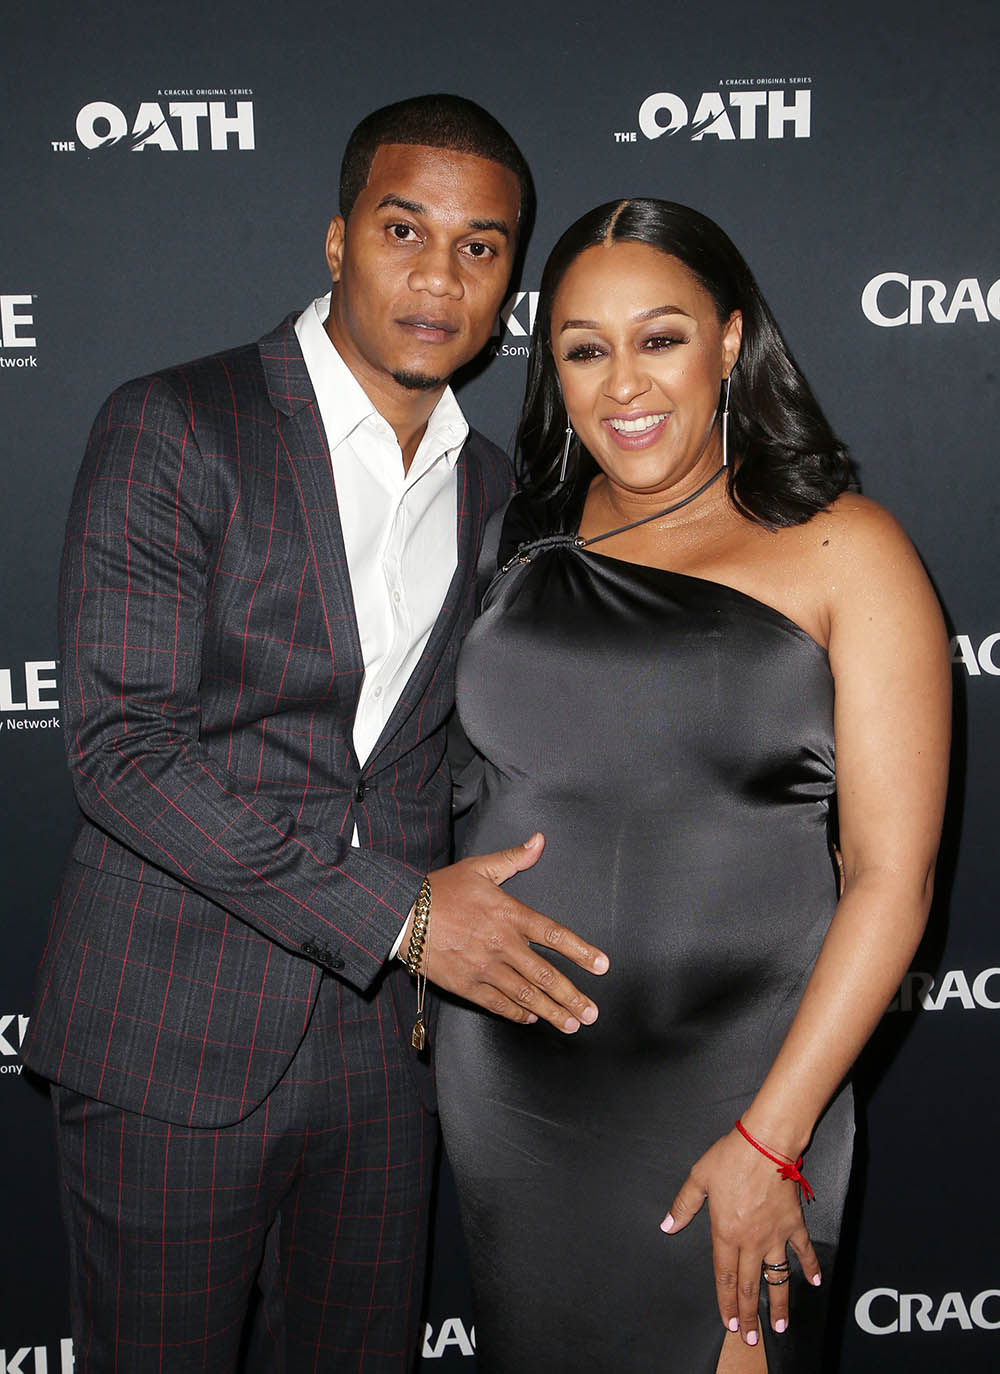 Cory and Tia Mowry-Hardrict at The Oath TV series premiere in Los Angeles